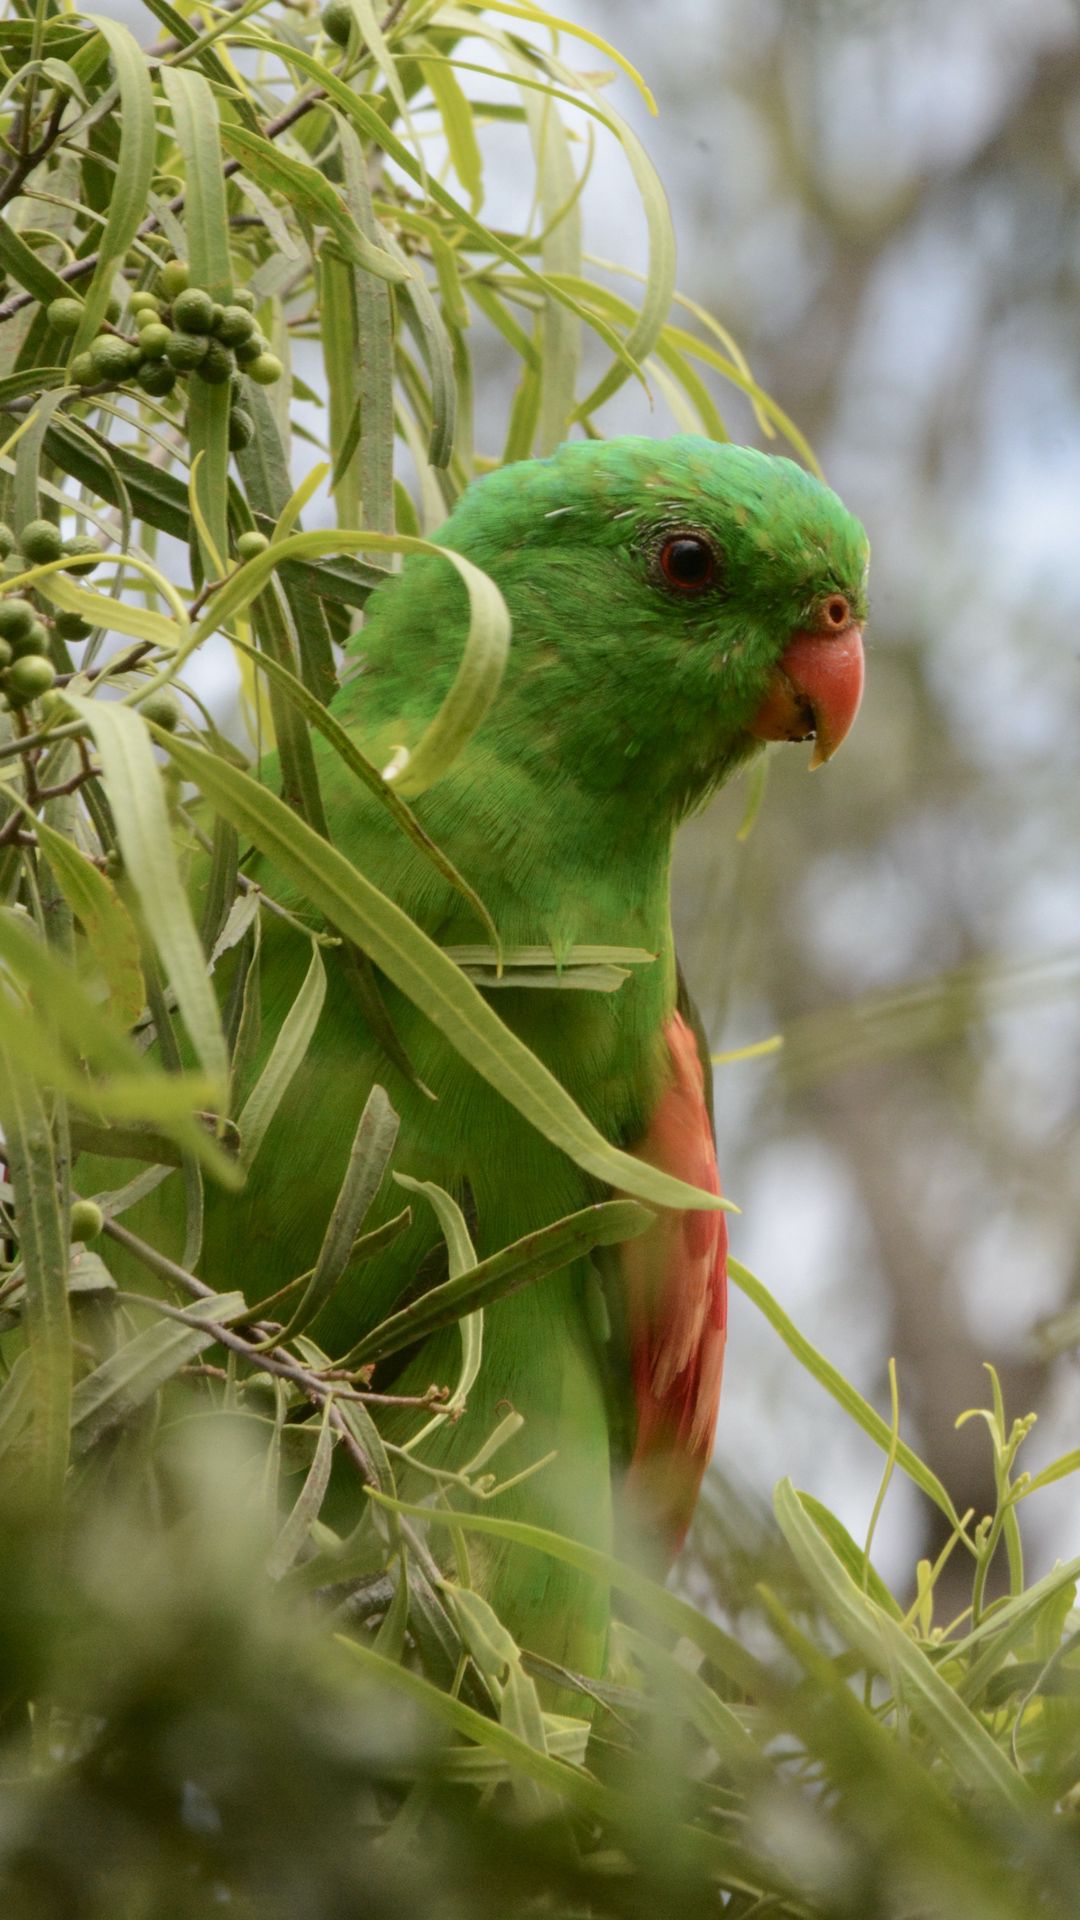 Download wallpaper 1080x1920 red-winged parrot, parrot, bird, branches ...